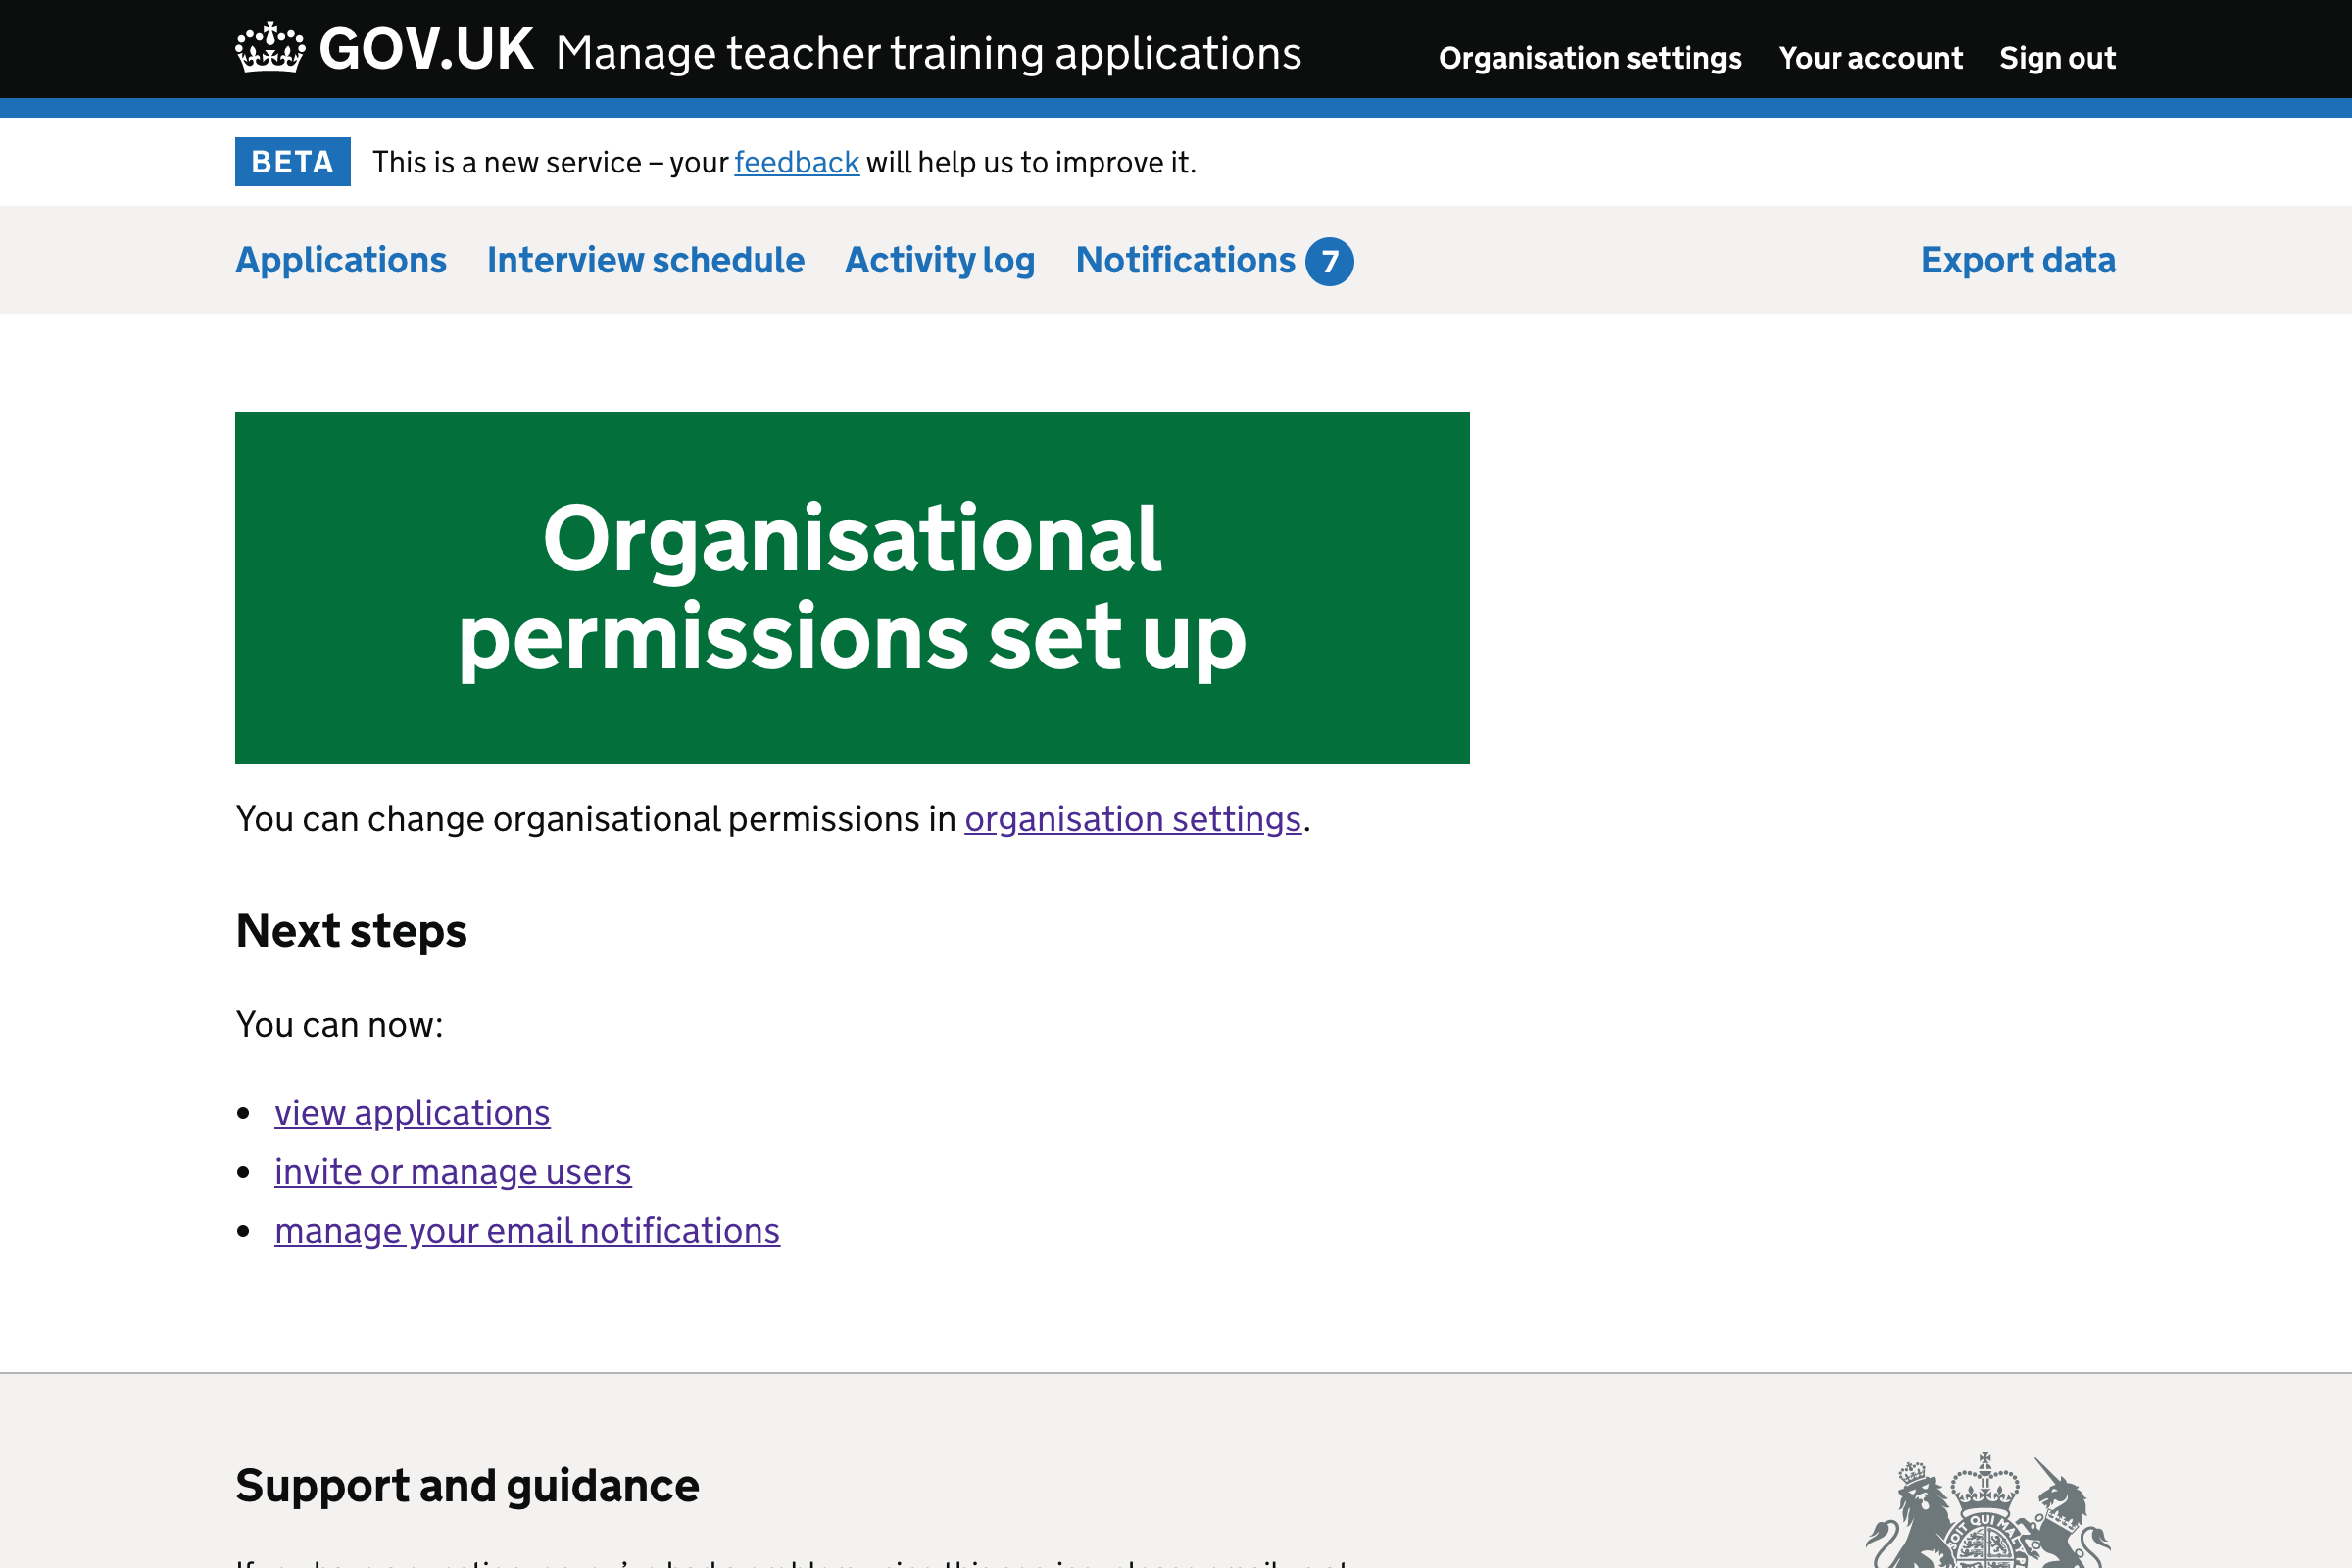 Screenshot of ‘Organisational permissions set up’ confirmation page.